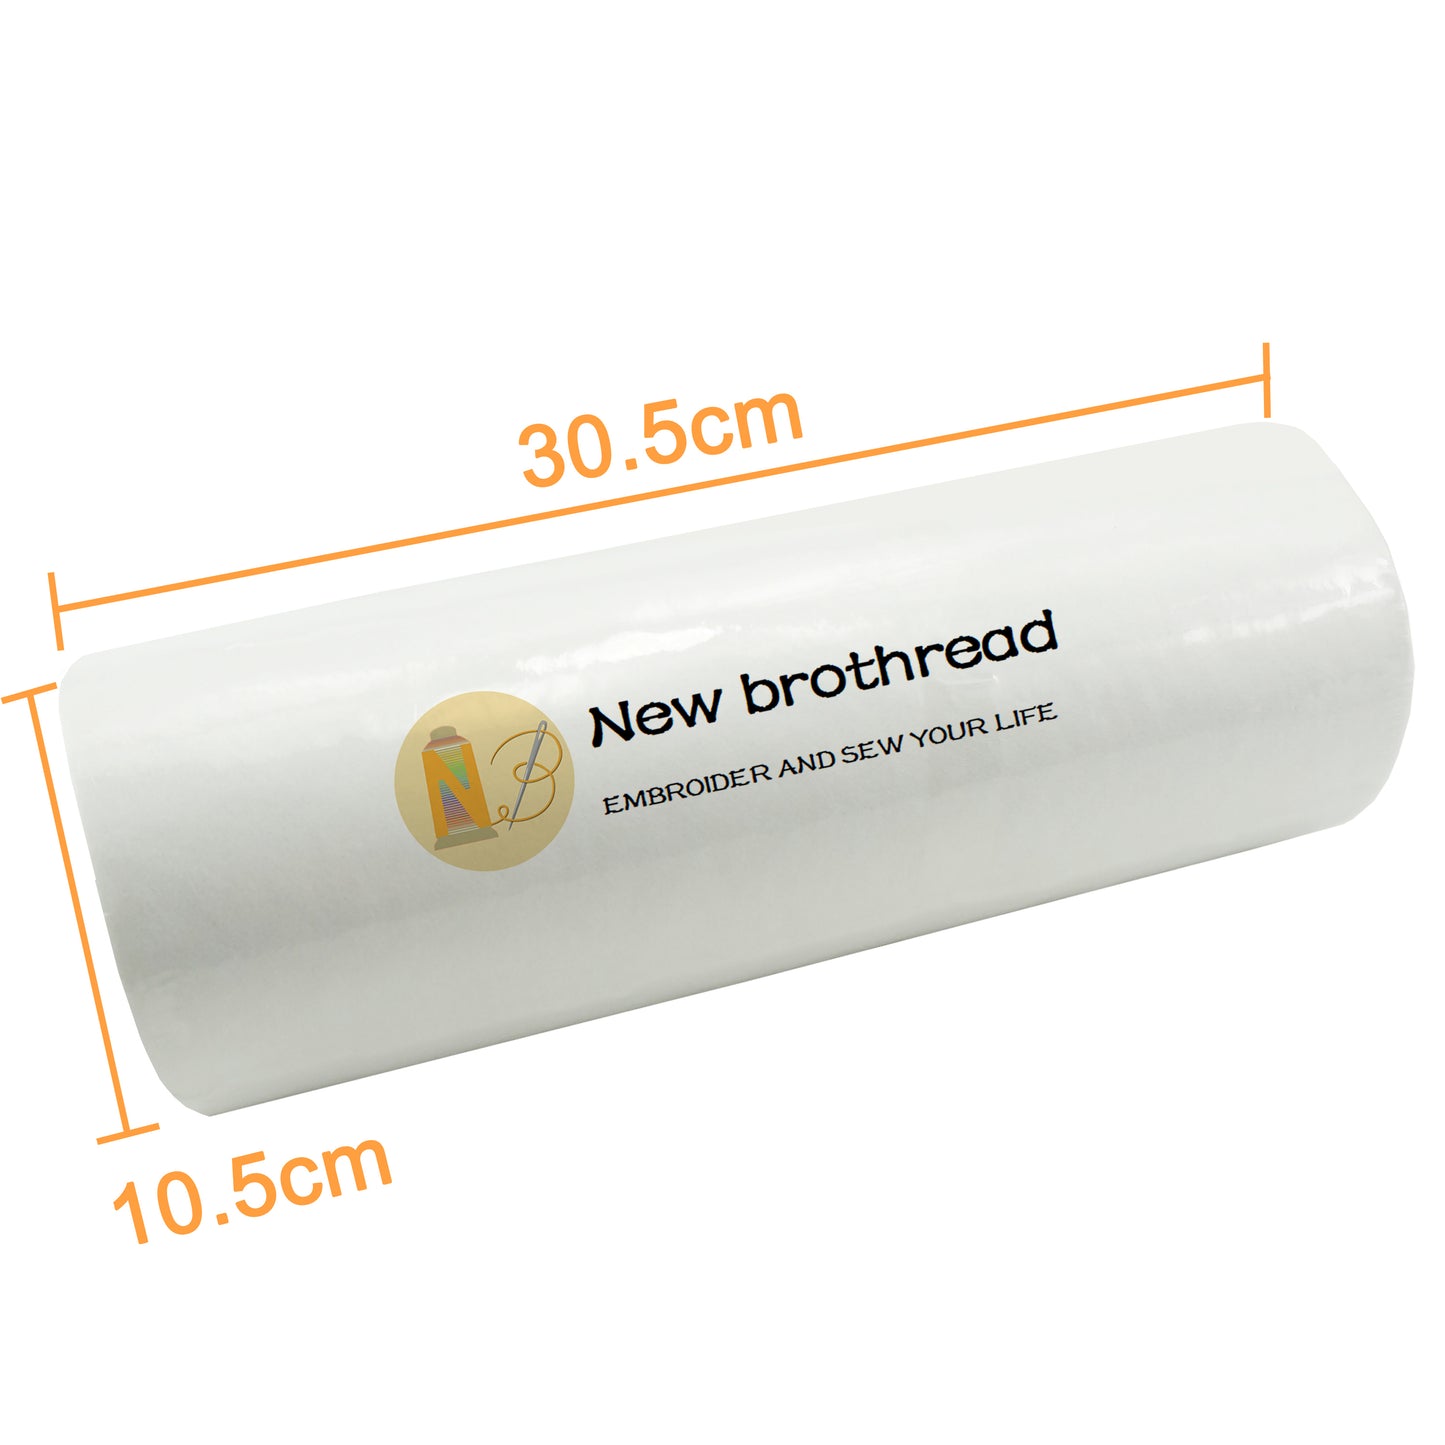 New brothread Fusible Iron on Cut Away Machine Embroidery Stabilizer Backing 12" x 25 Yd roll - Medium Weight 2.5 oz